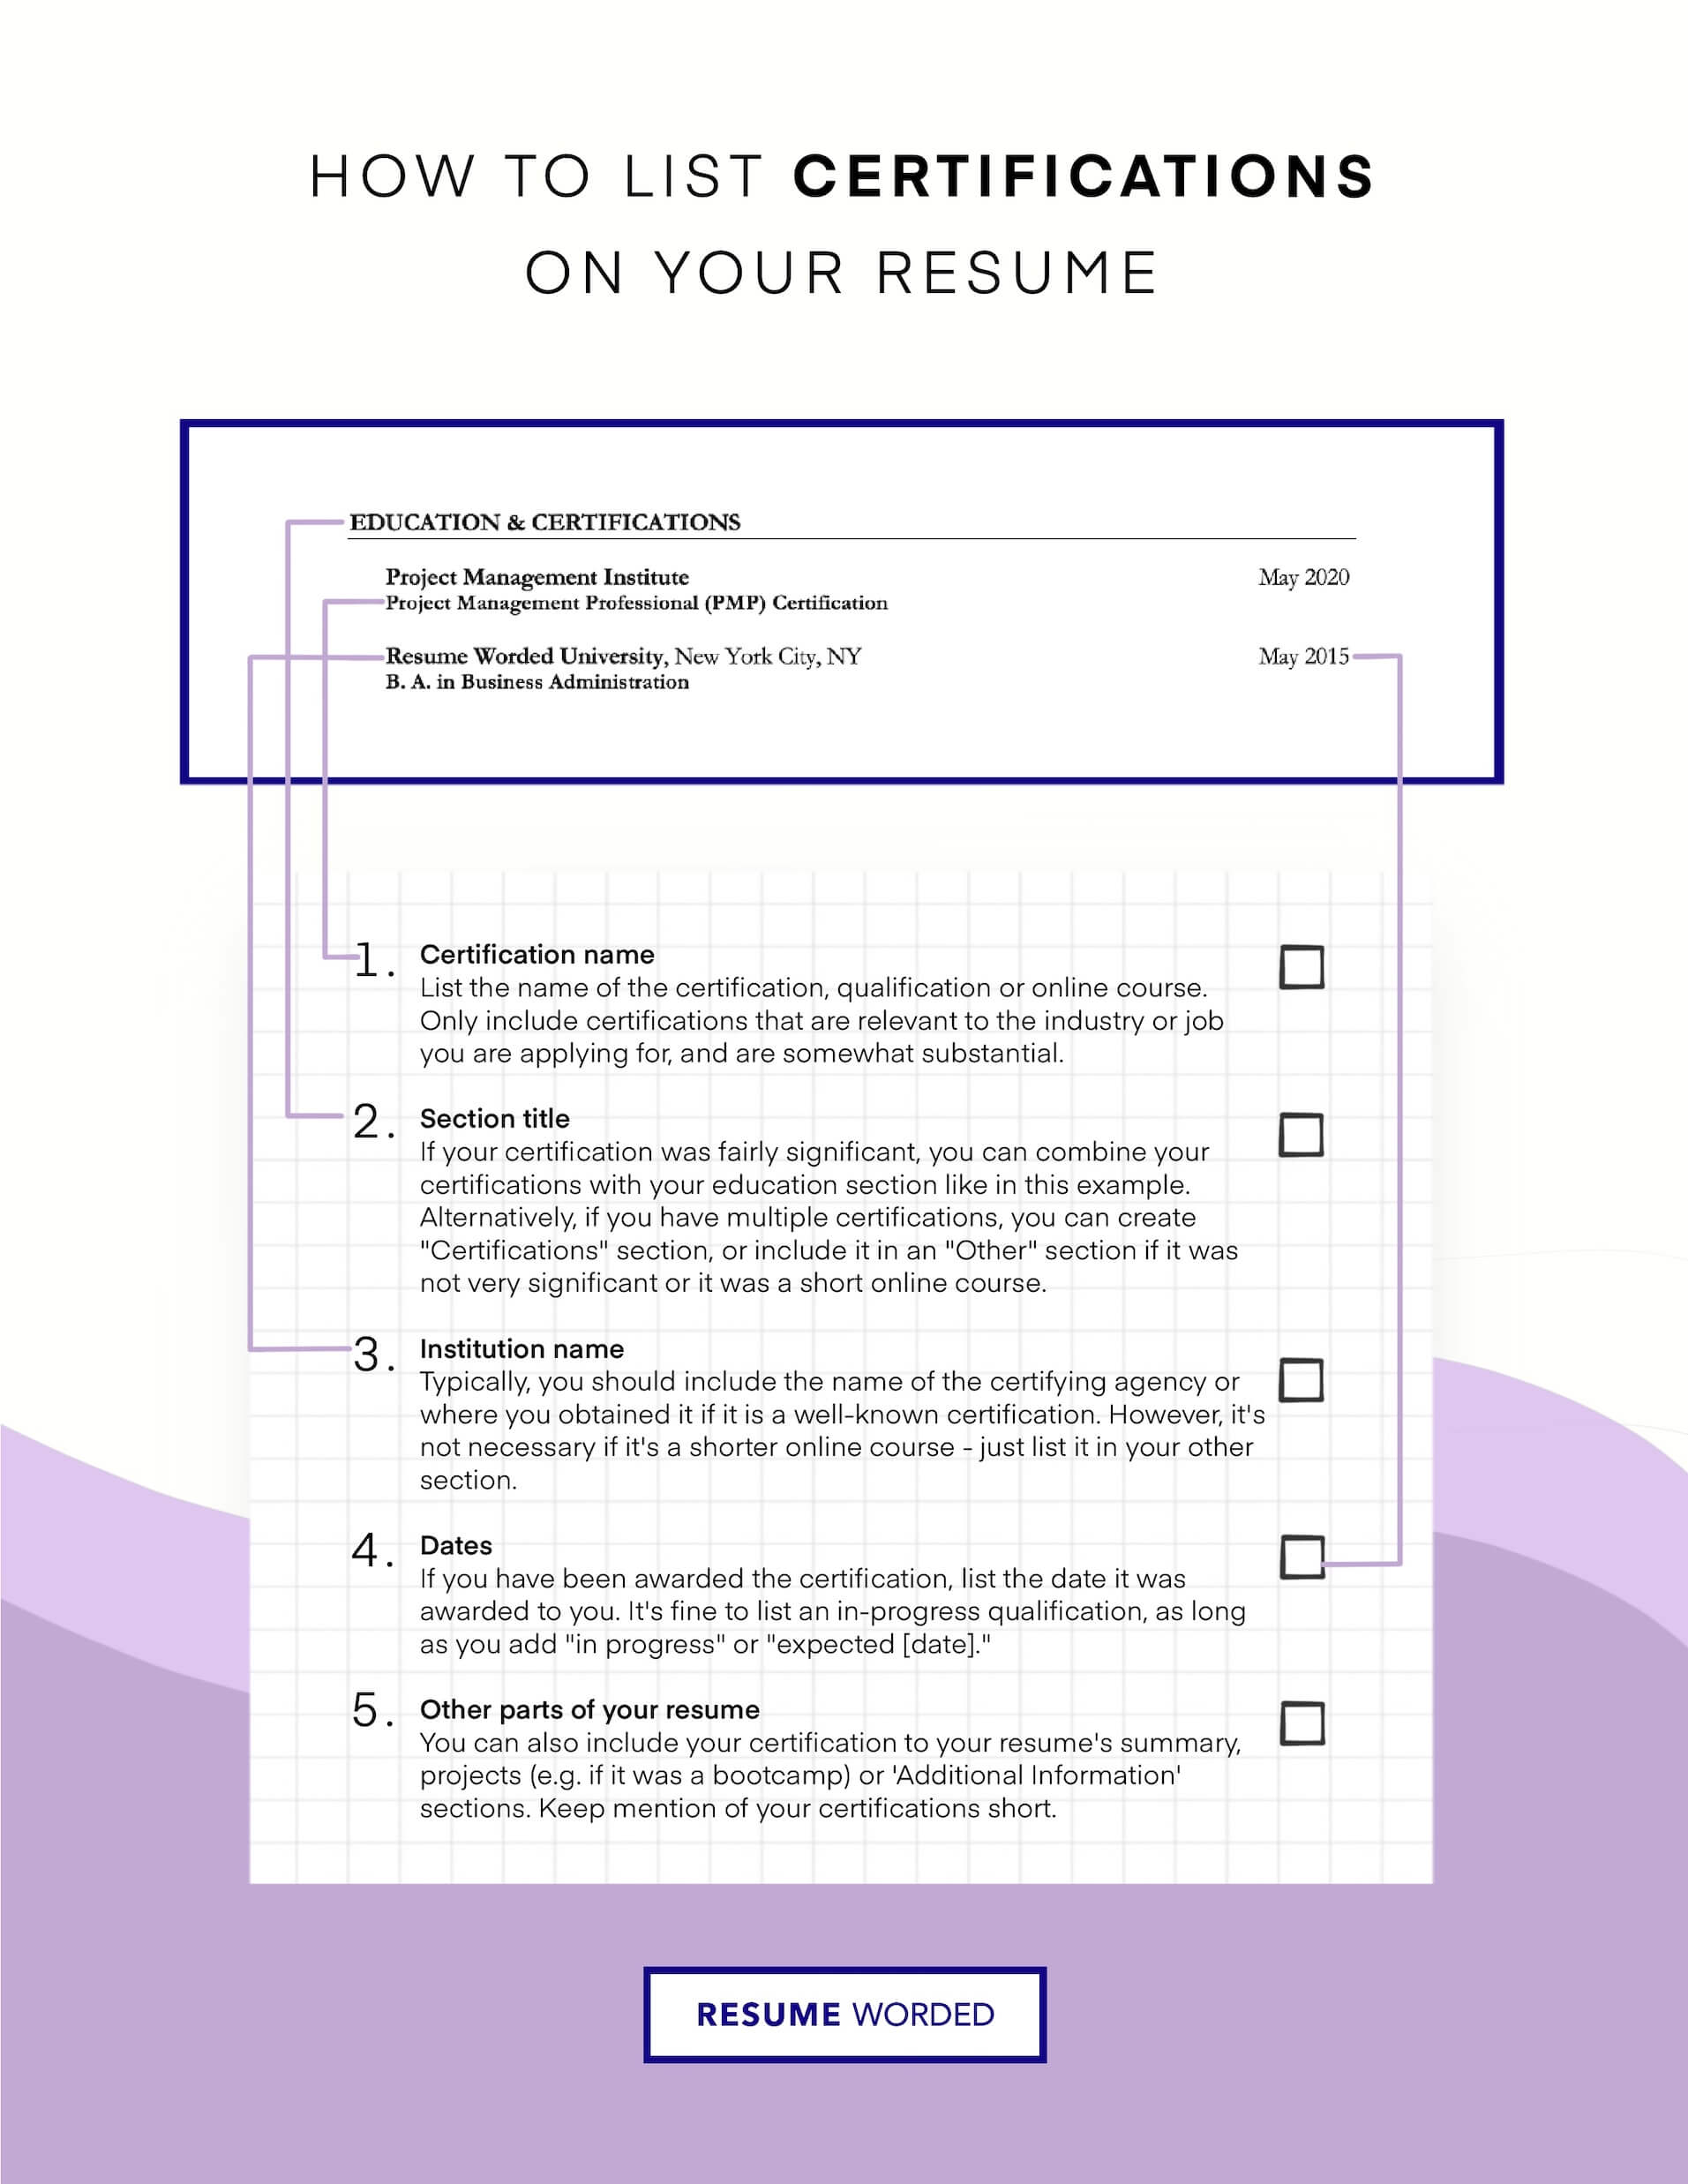 Include any recruiter or HR certifications. - Recruiting Coordinator Resume